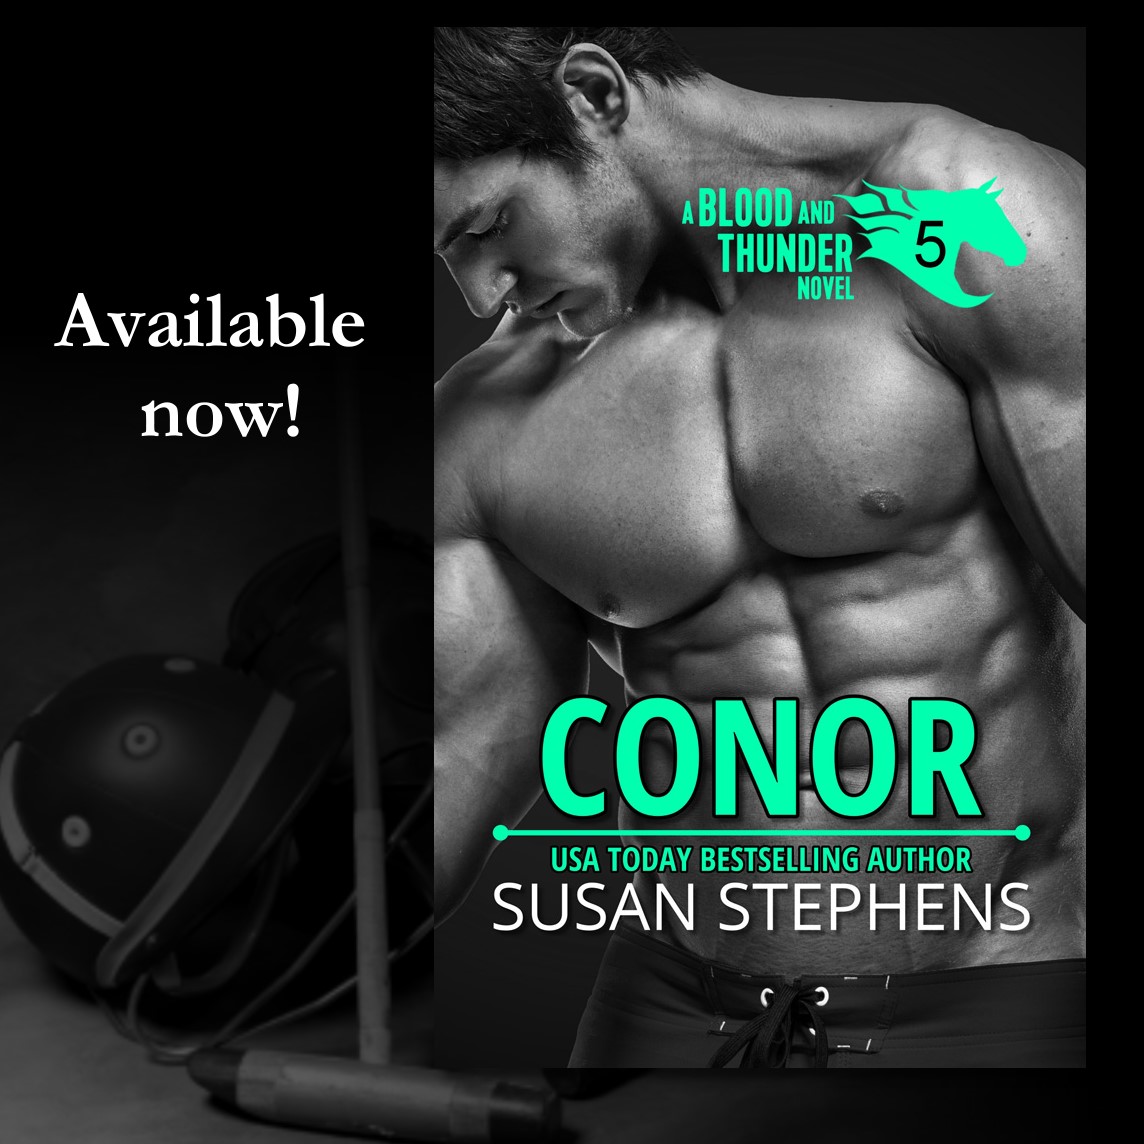 Susan Stephens' Conor Blood and Thunder book 5